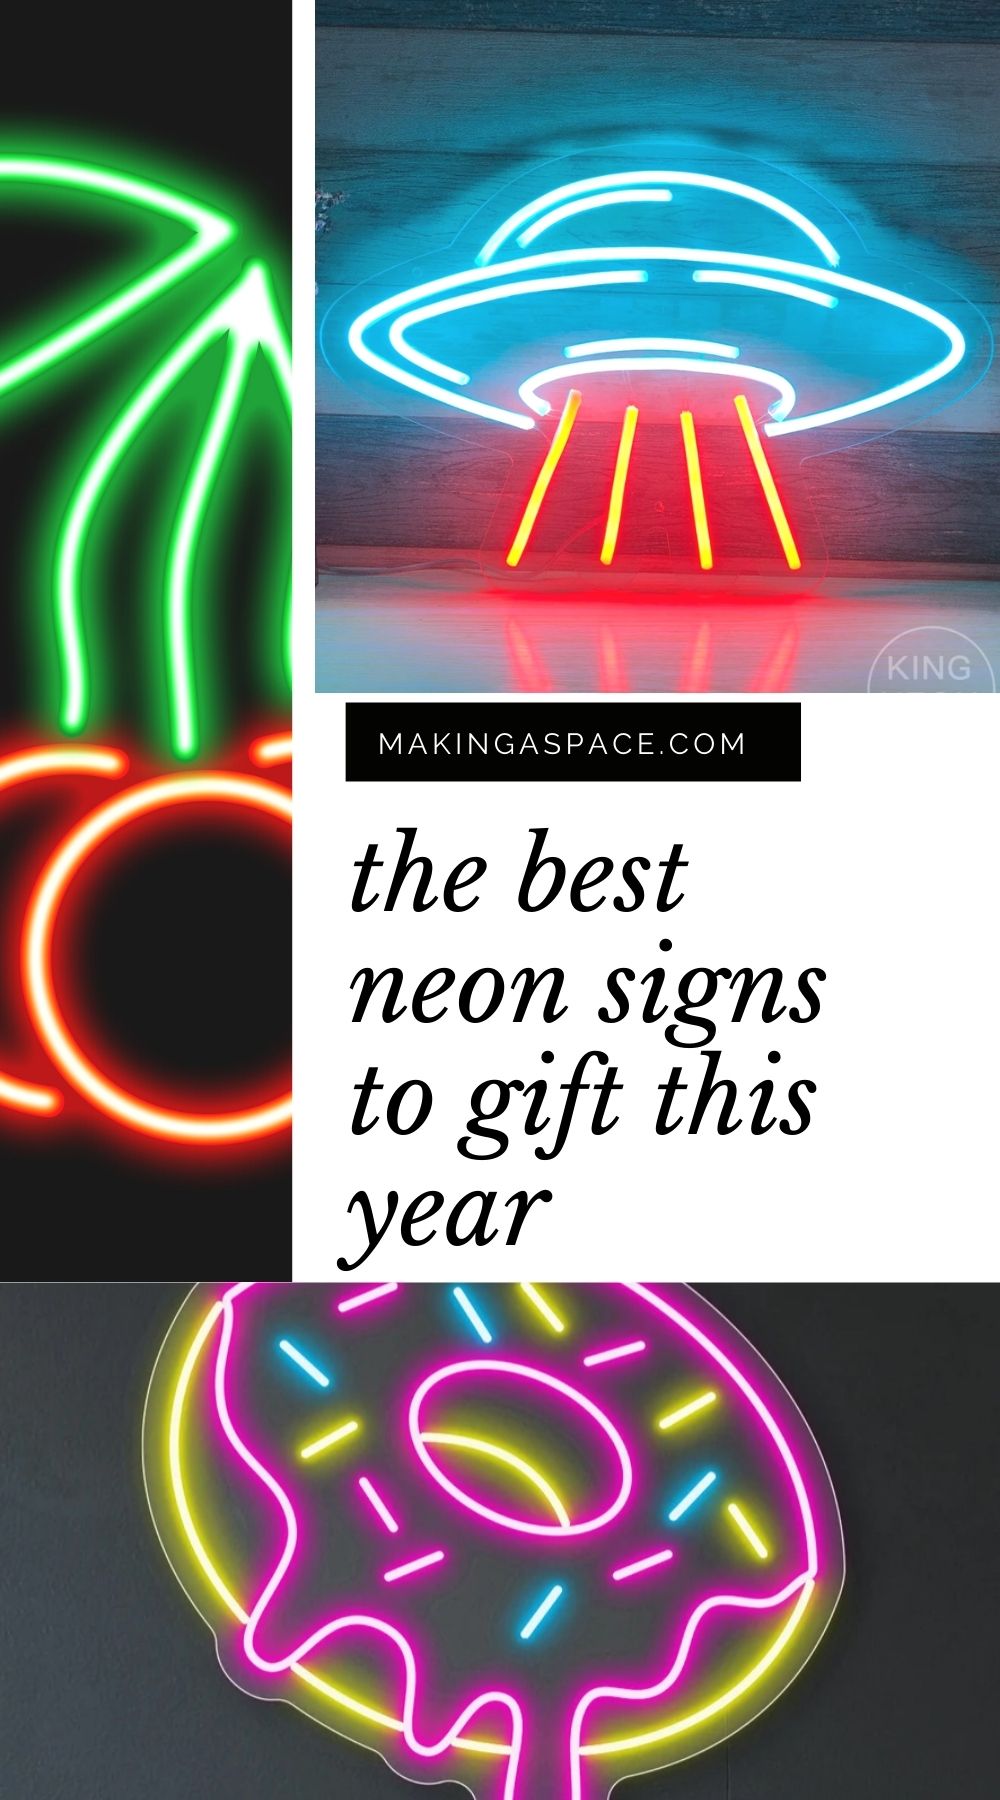 The Best neon signs to gift this yer